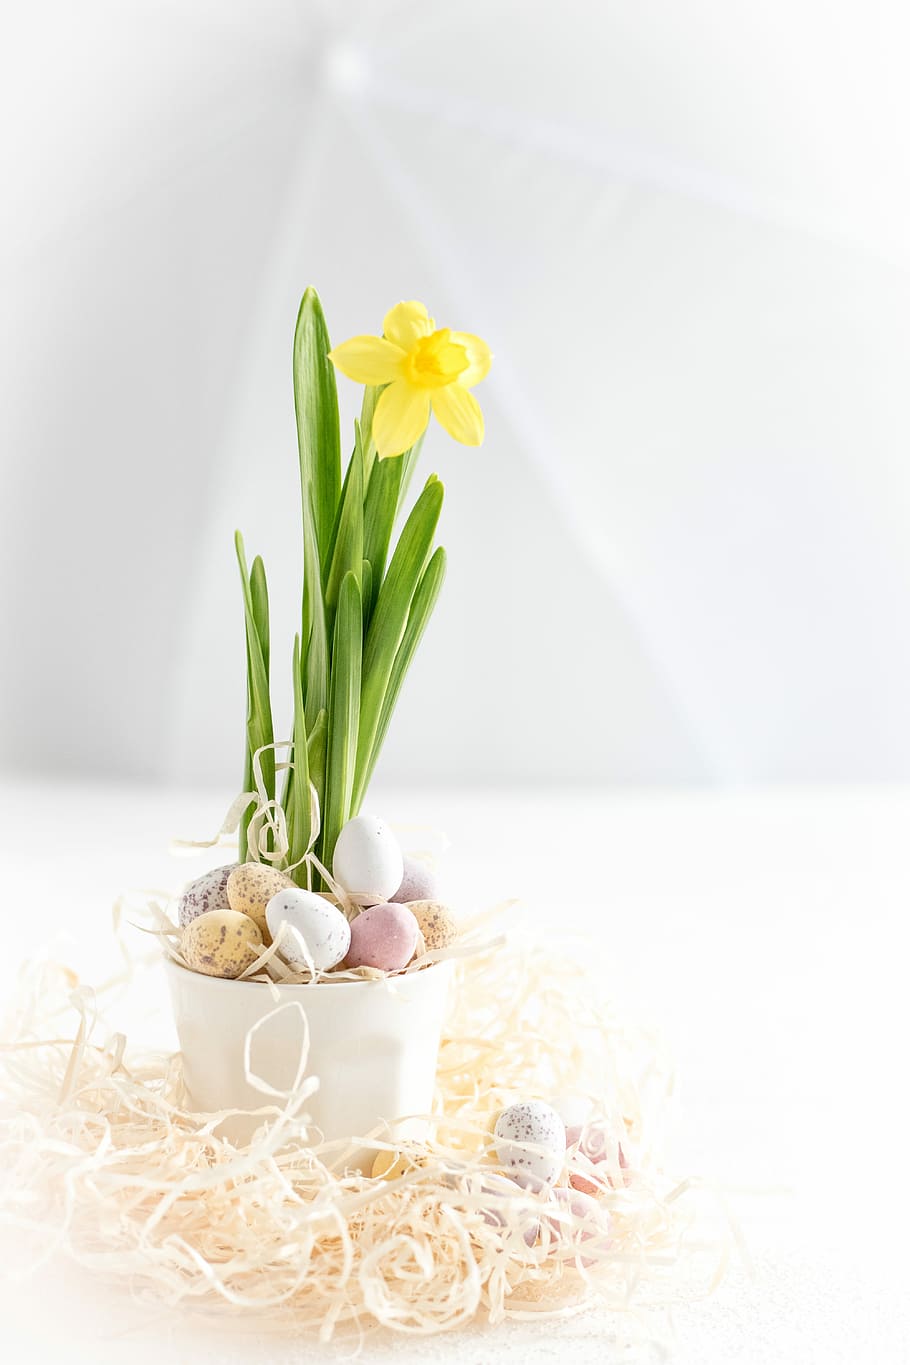 yellow flower, yellwo daffodil in white vase with Easter eggs closeup photography